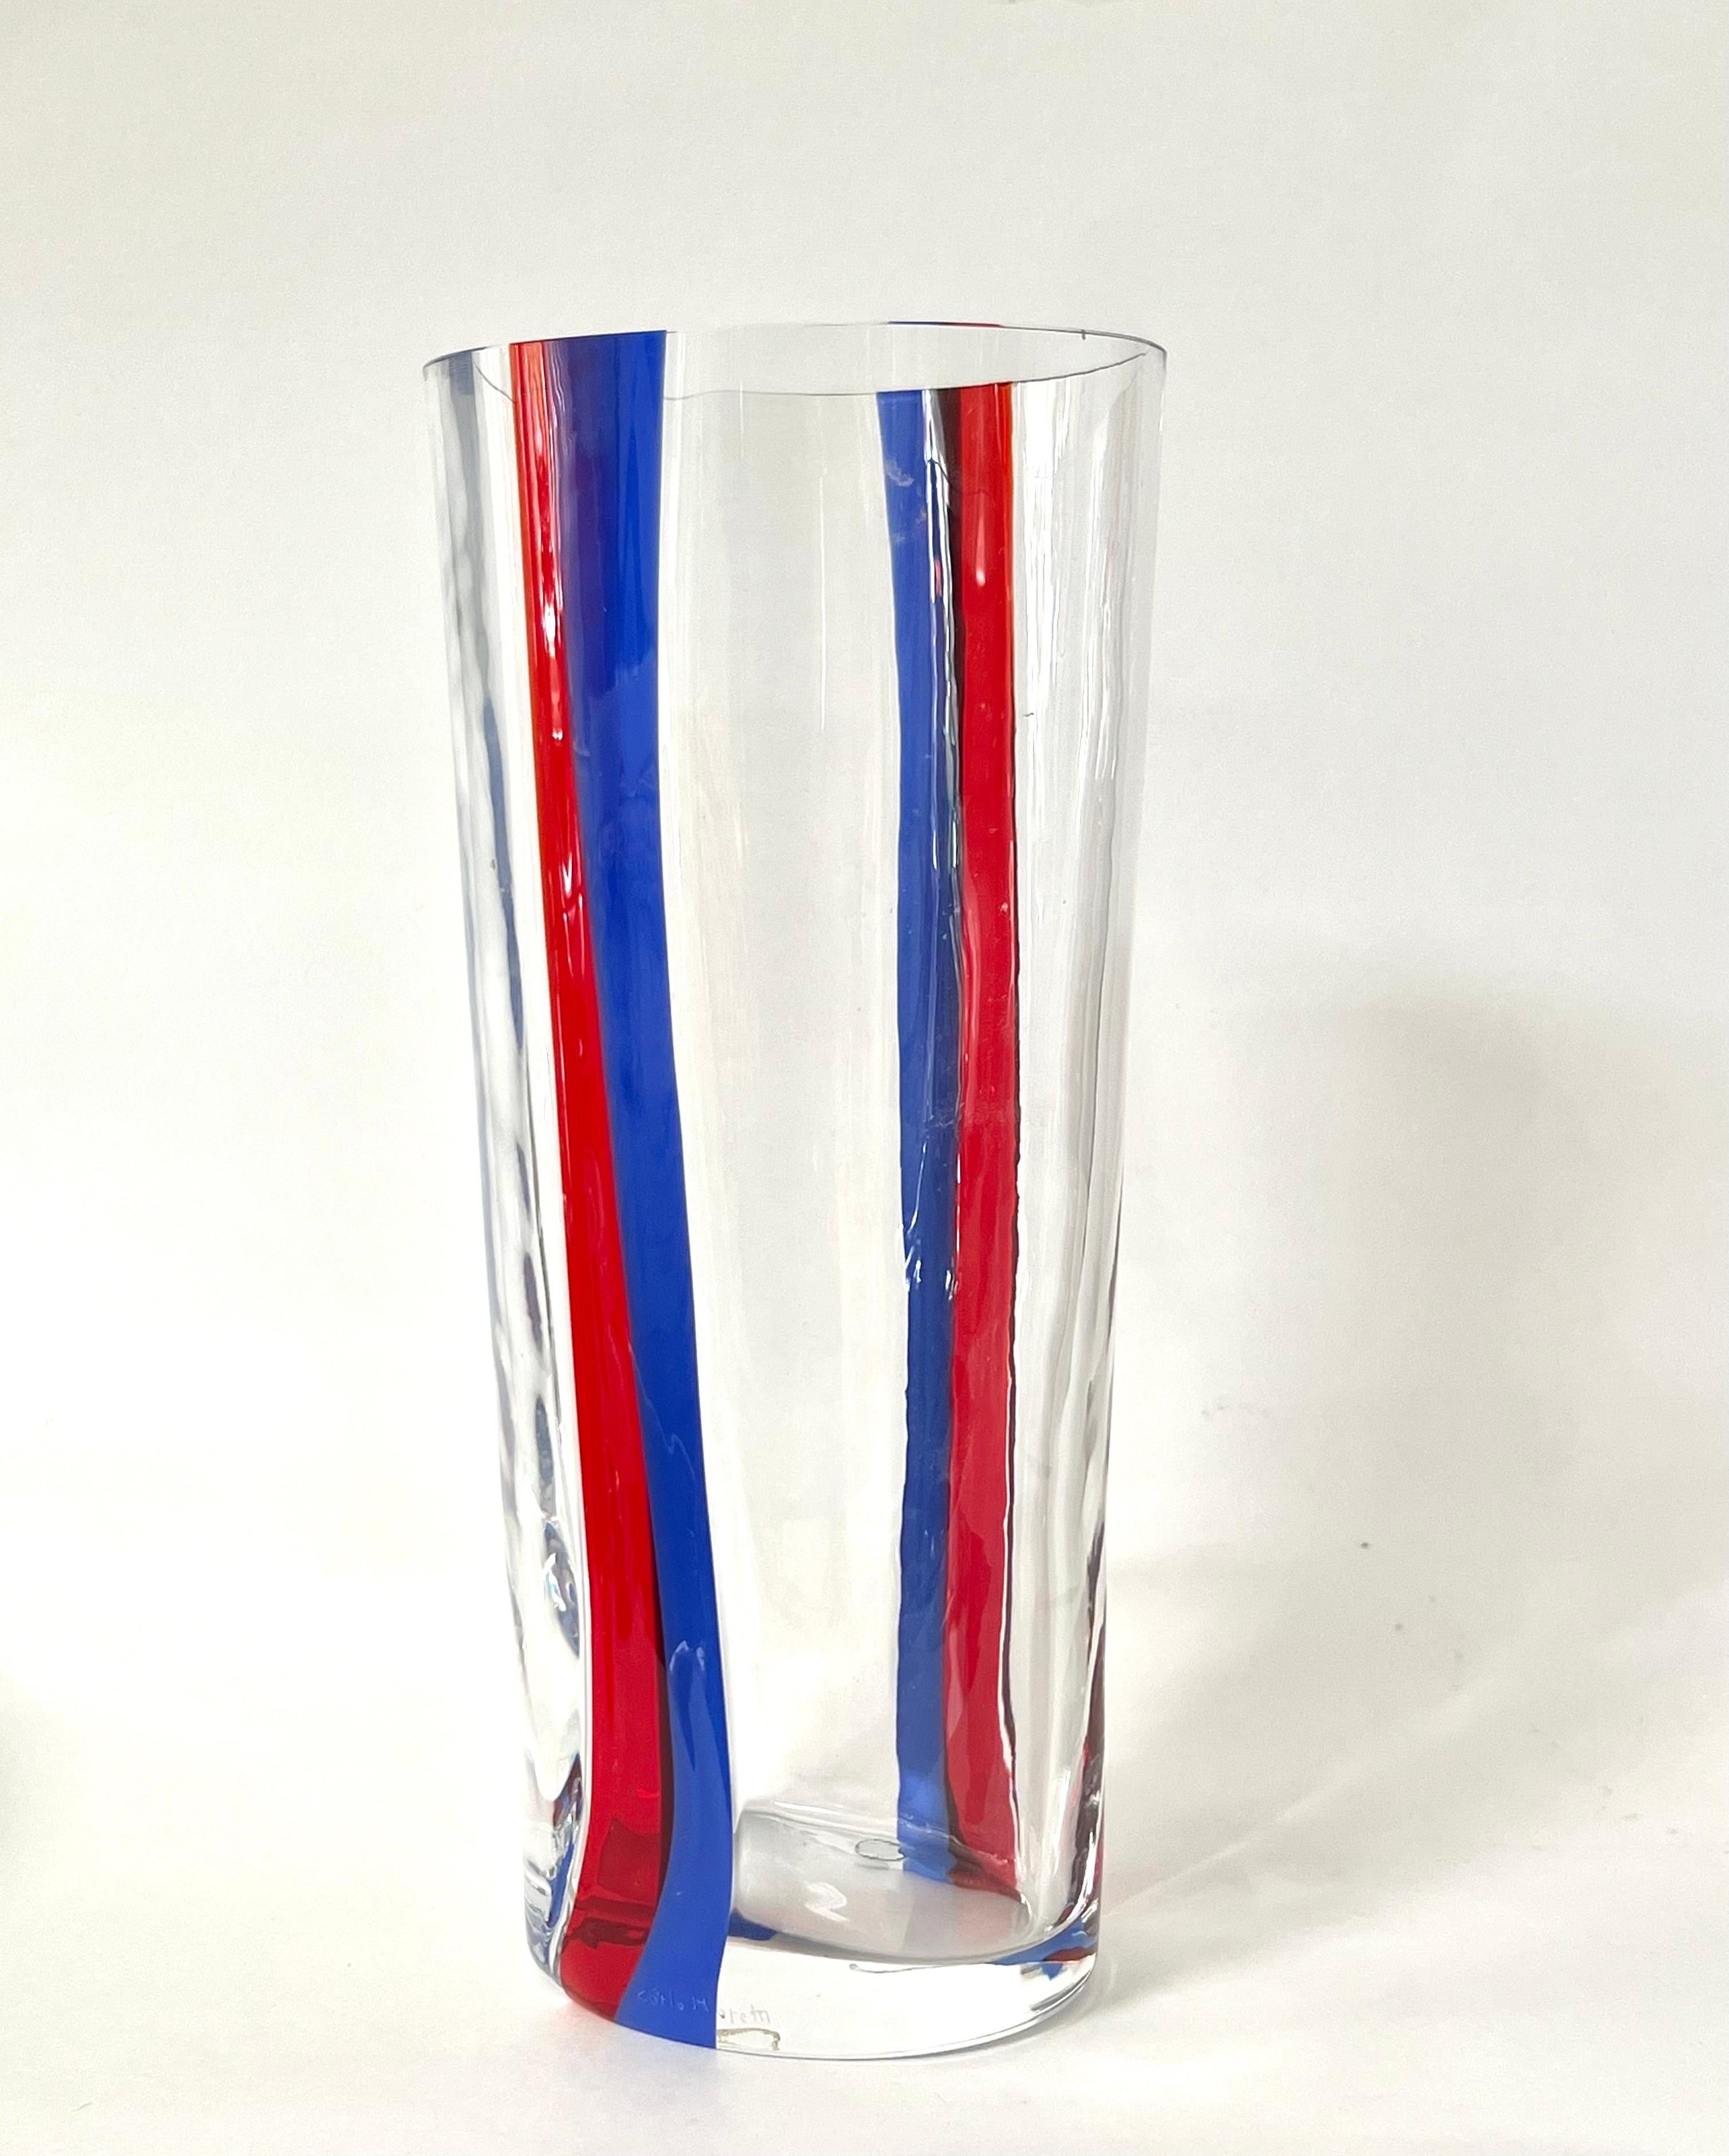 A tall Carlo Moretti Art glass vase. Clear with red and blue fluid stripes. Signed and dated.